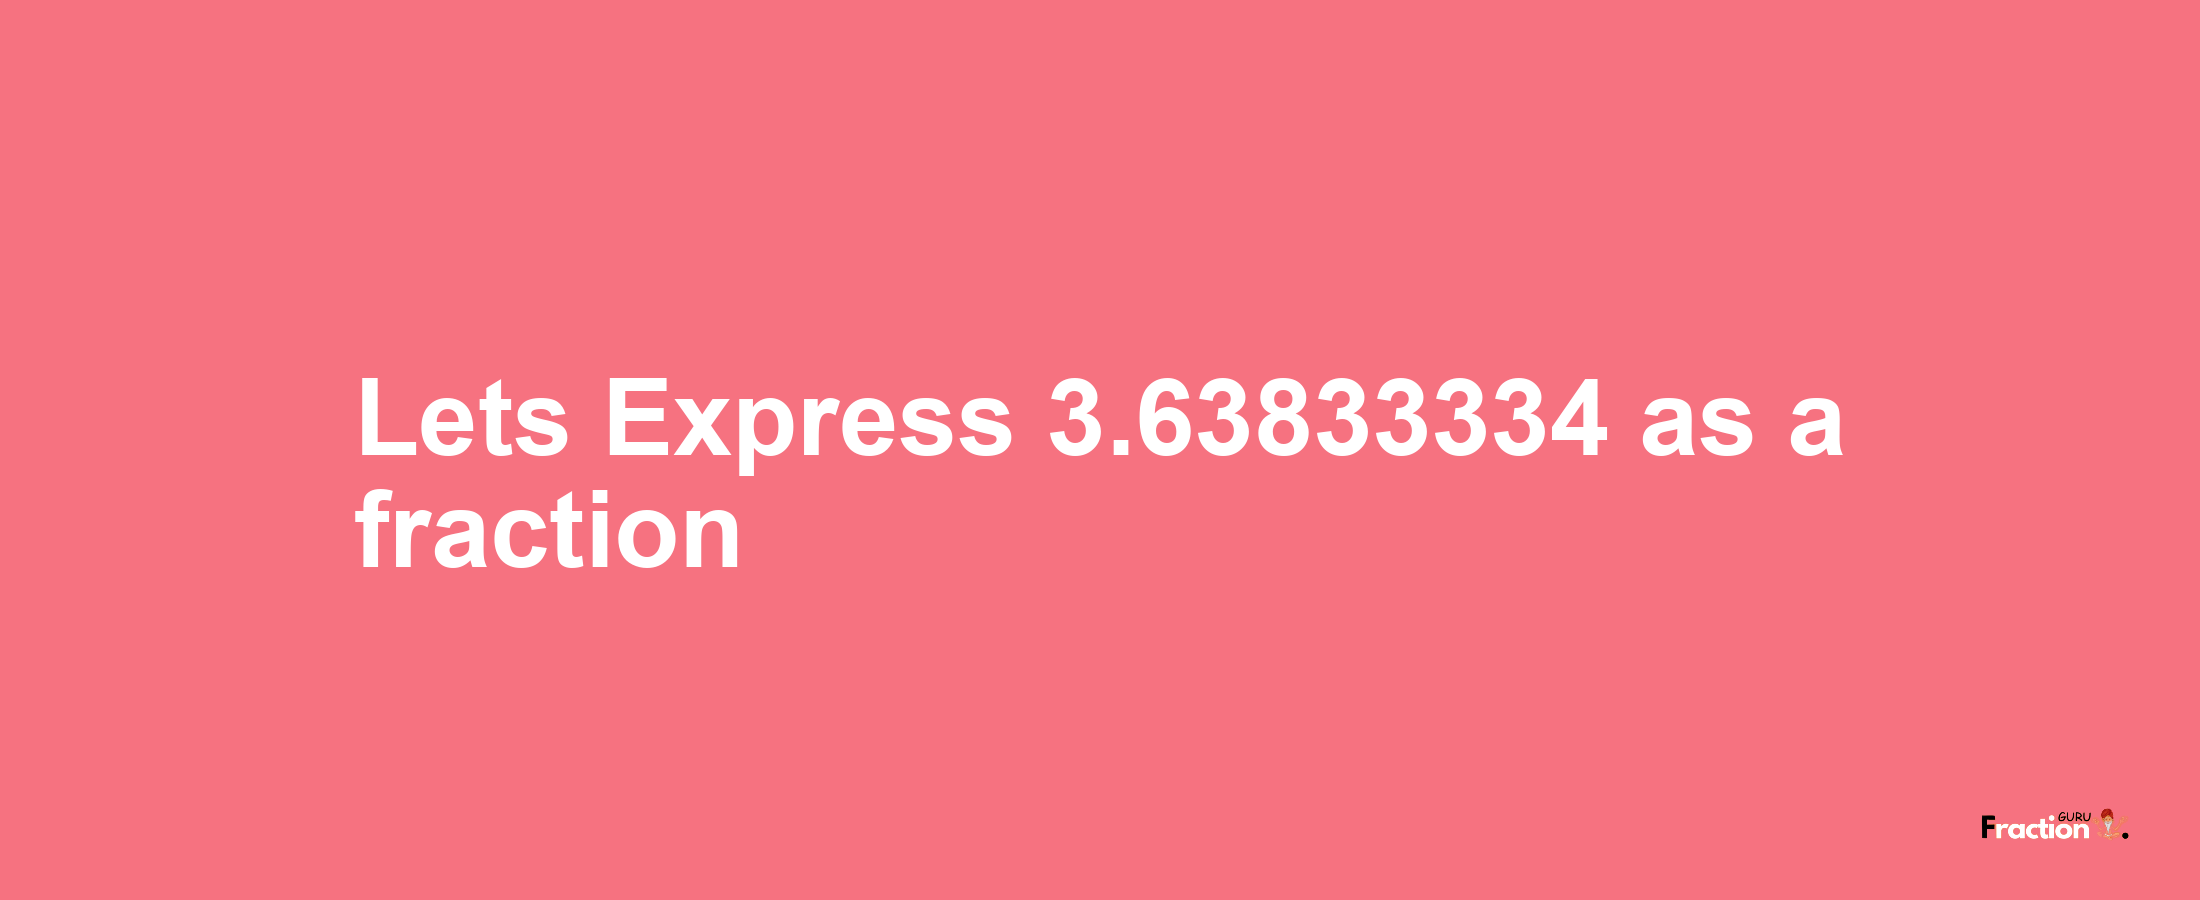 Lets Express 3.63833334 as afraction